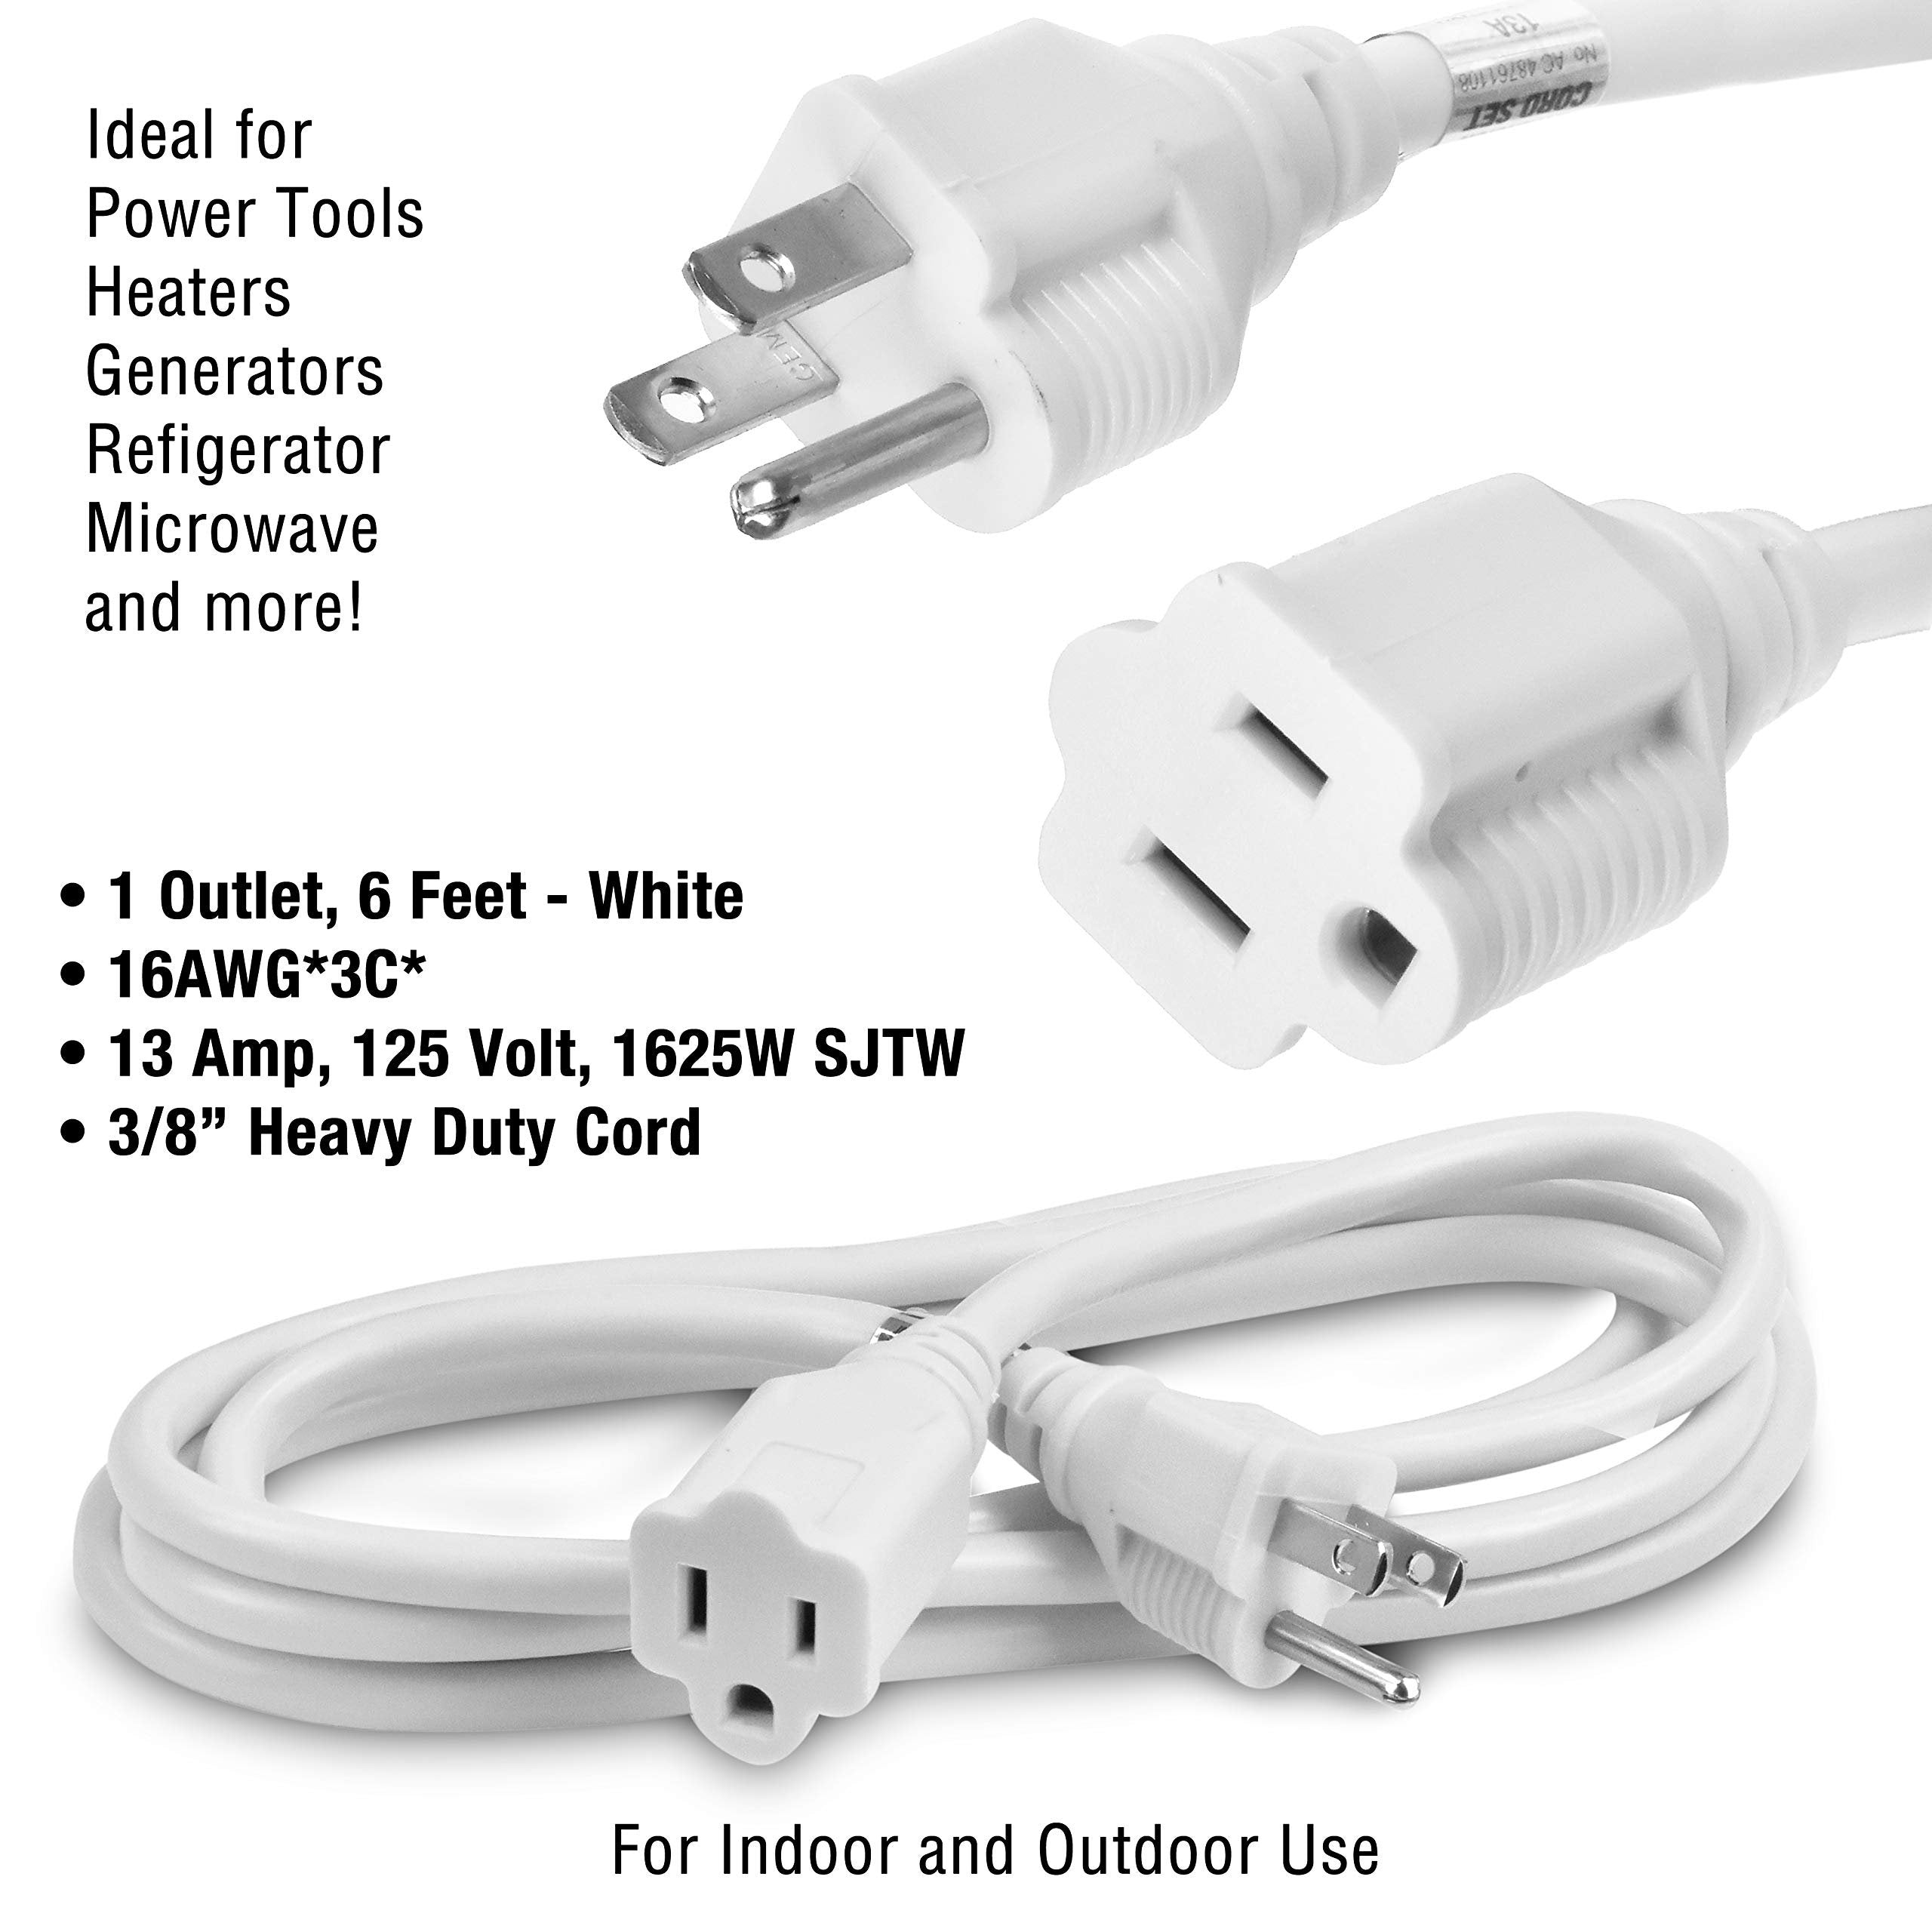 BindMaster Heavy Duty 16/3 Extension Cord, 3ft White- Indoor/Outdoor, UL Listed